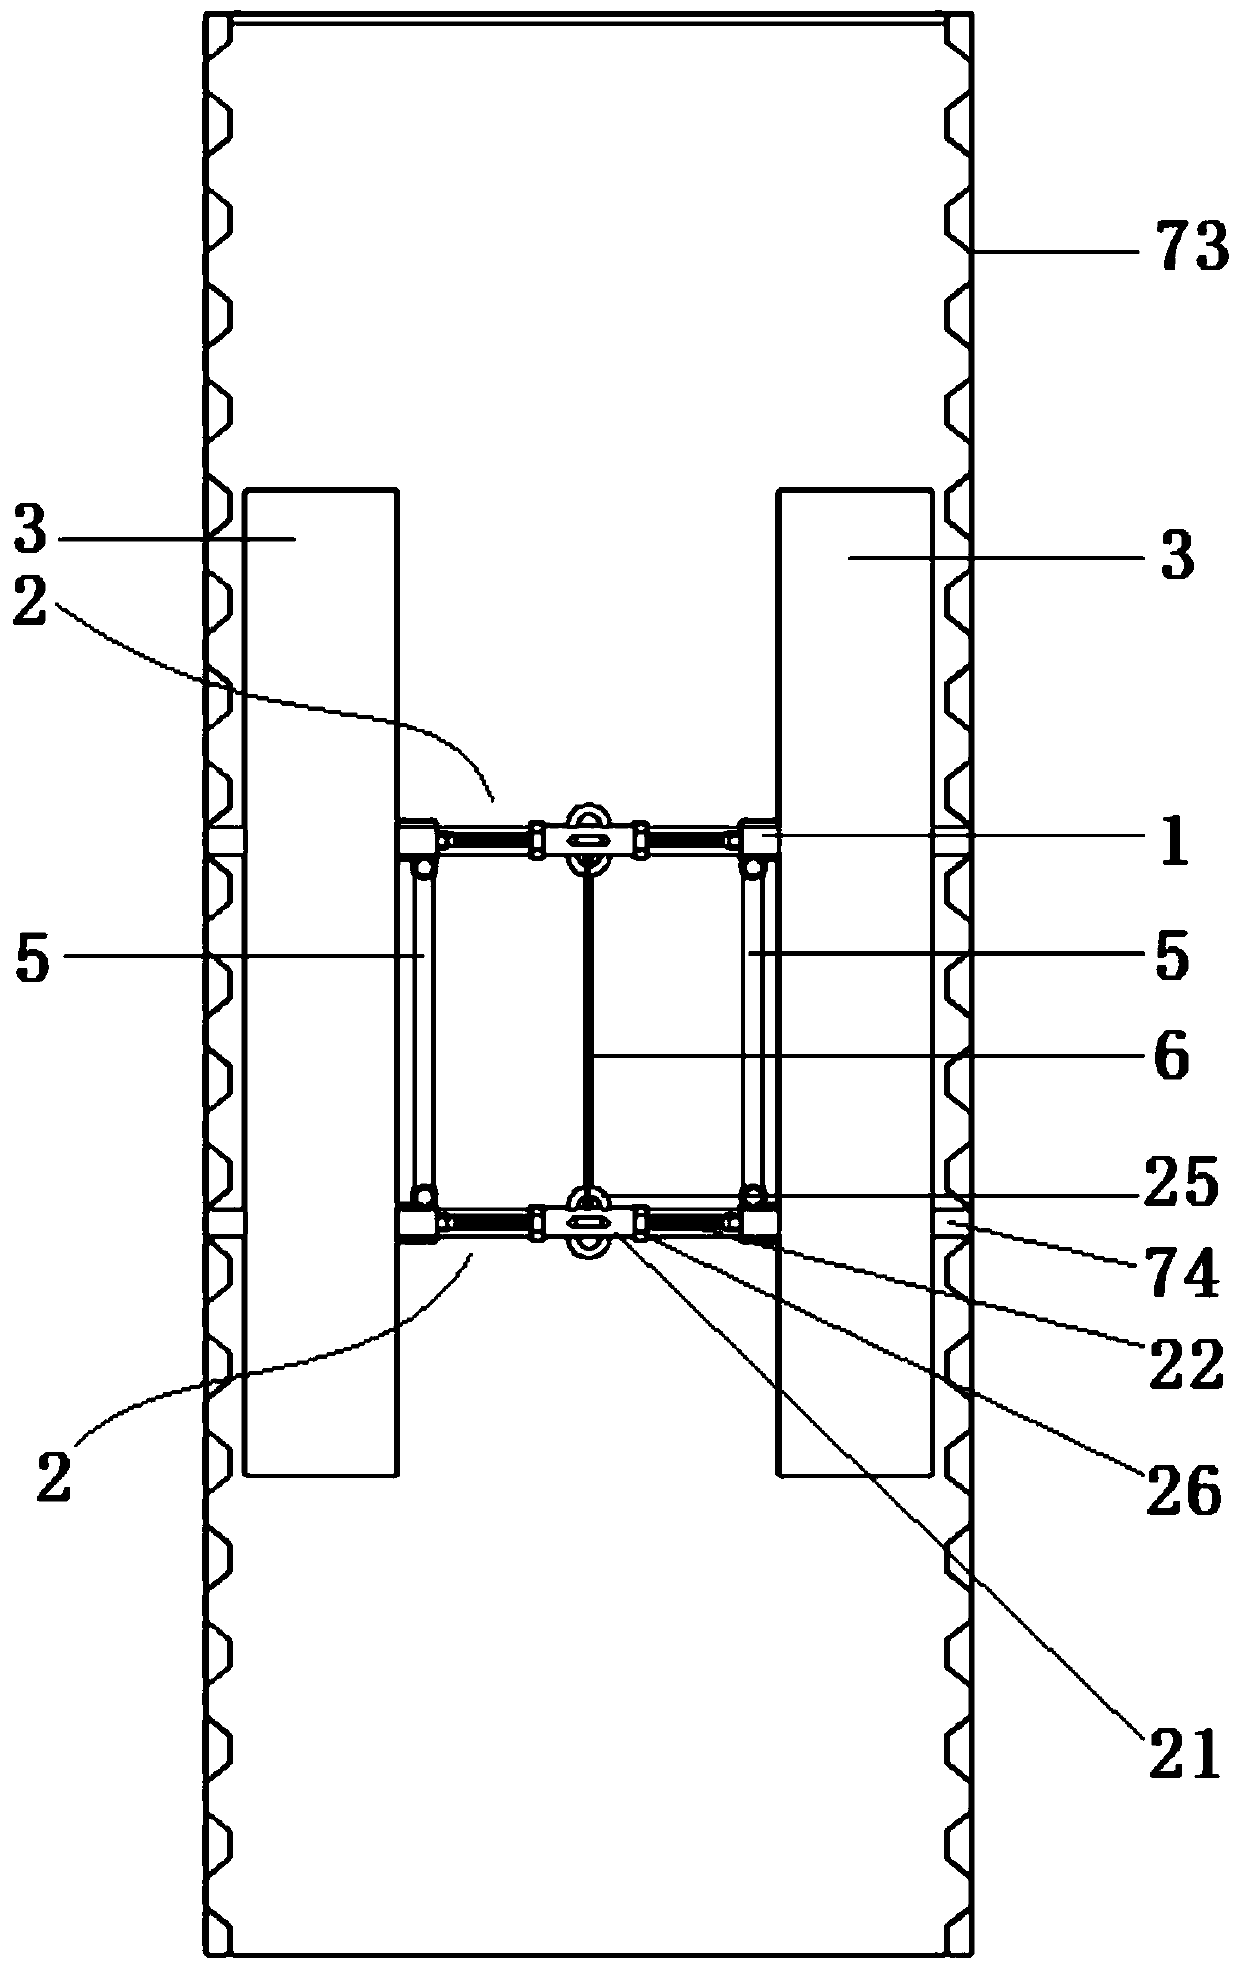 Lateral shoring device for goods in container and method for reinforcing goods in container